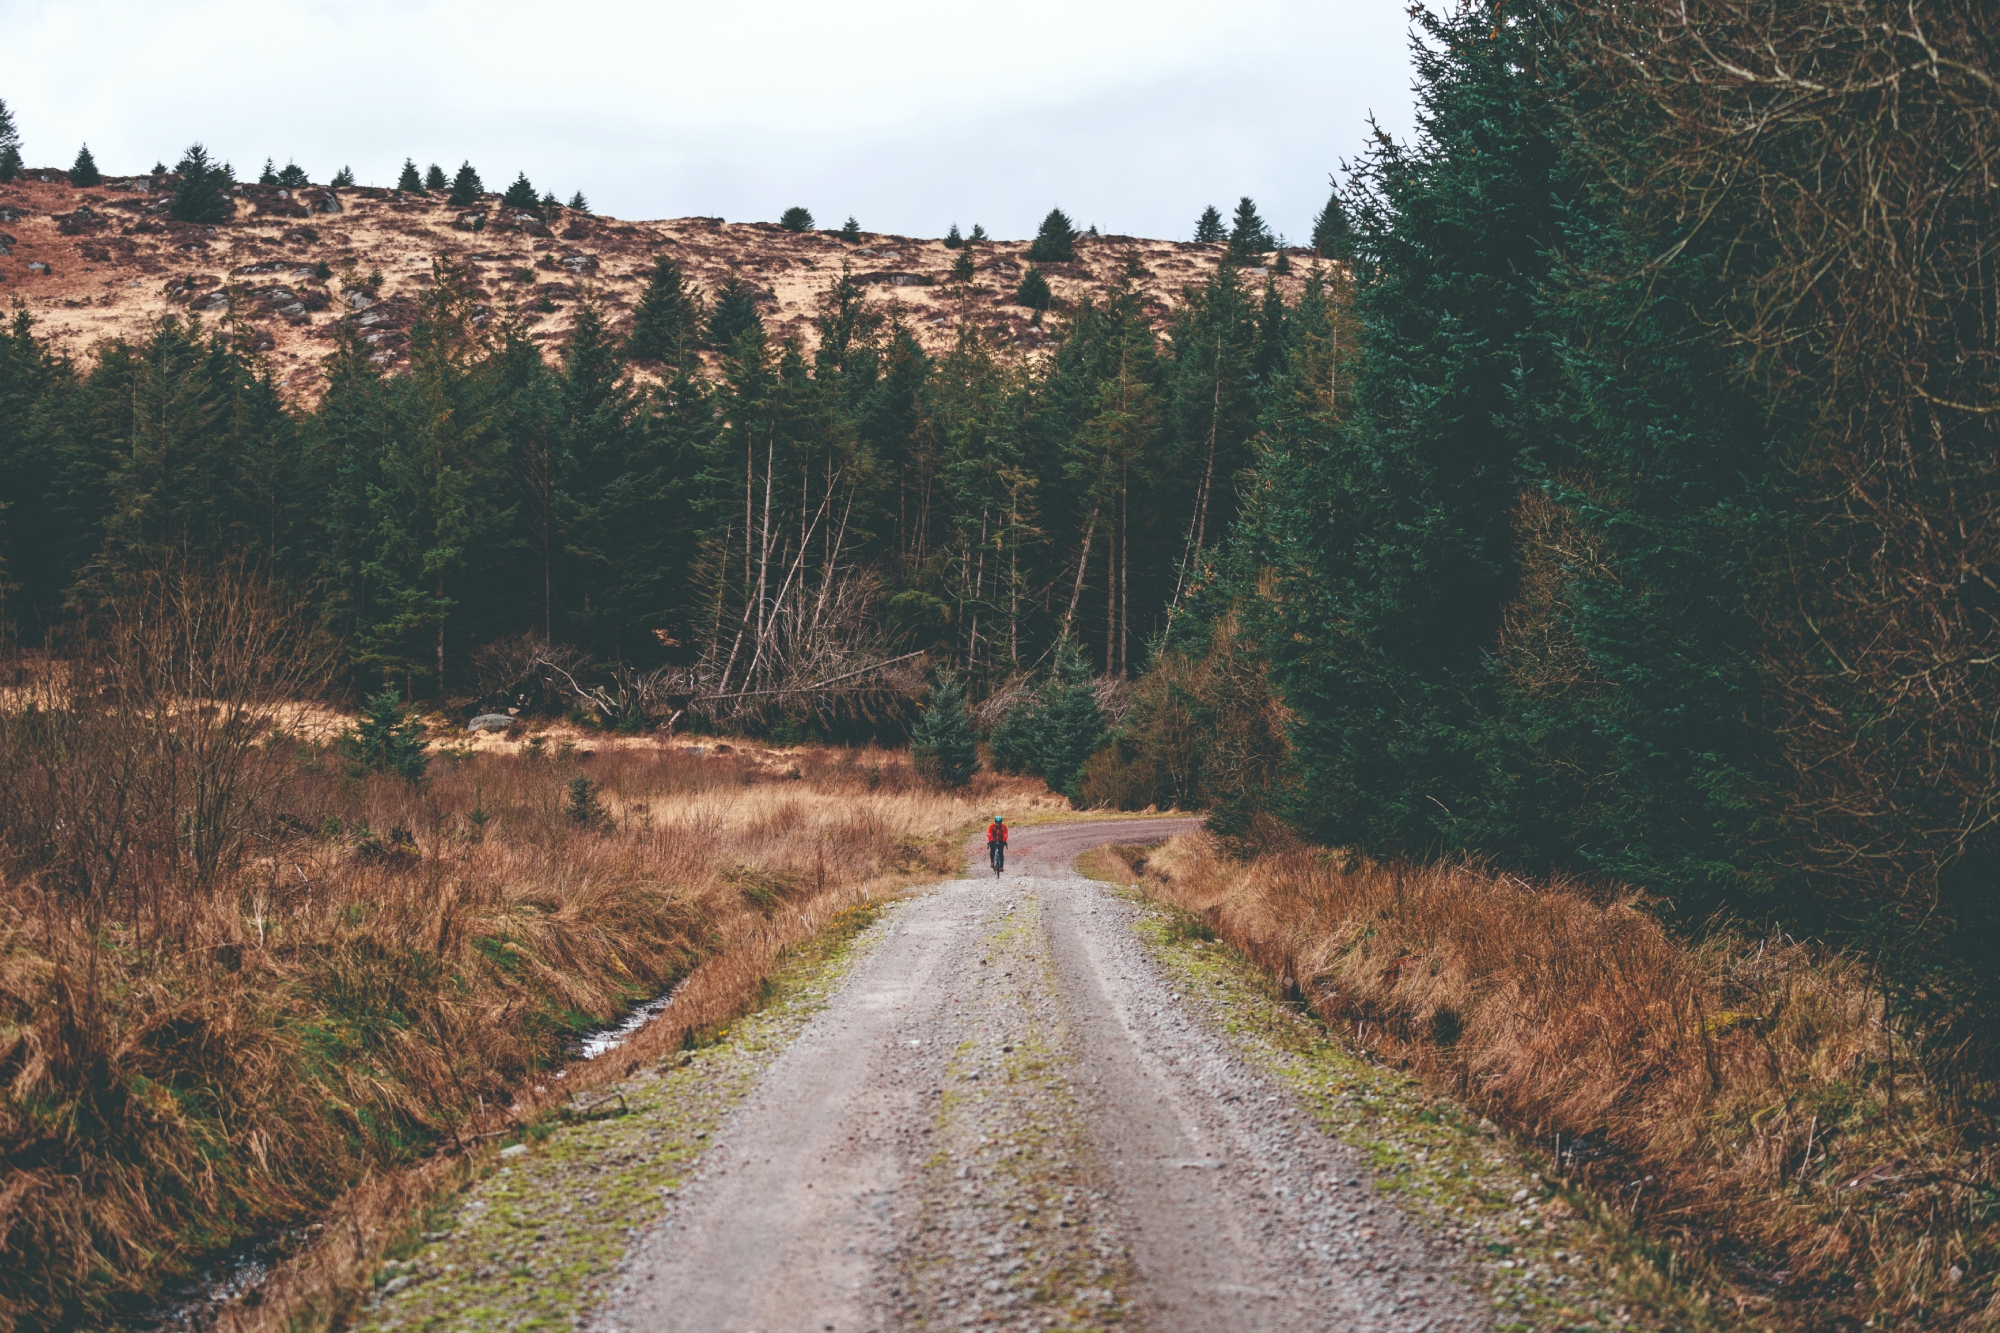 A lone rider heads towards the camera on a gravel track through Scottish pines